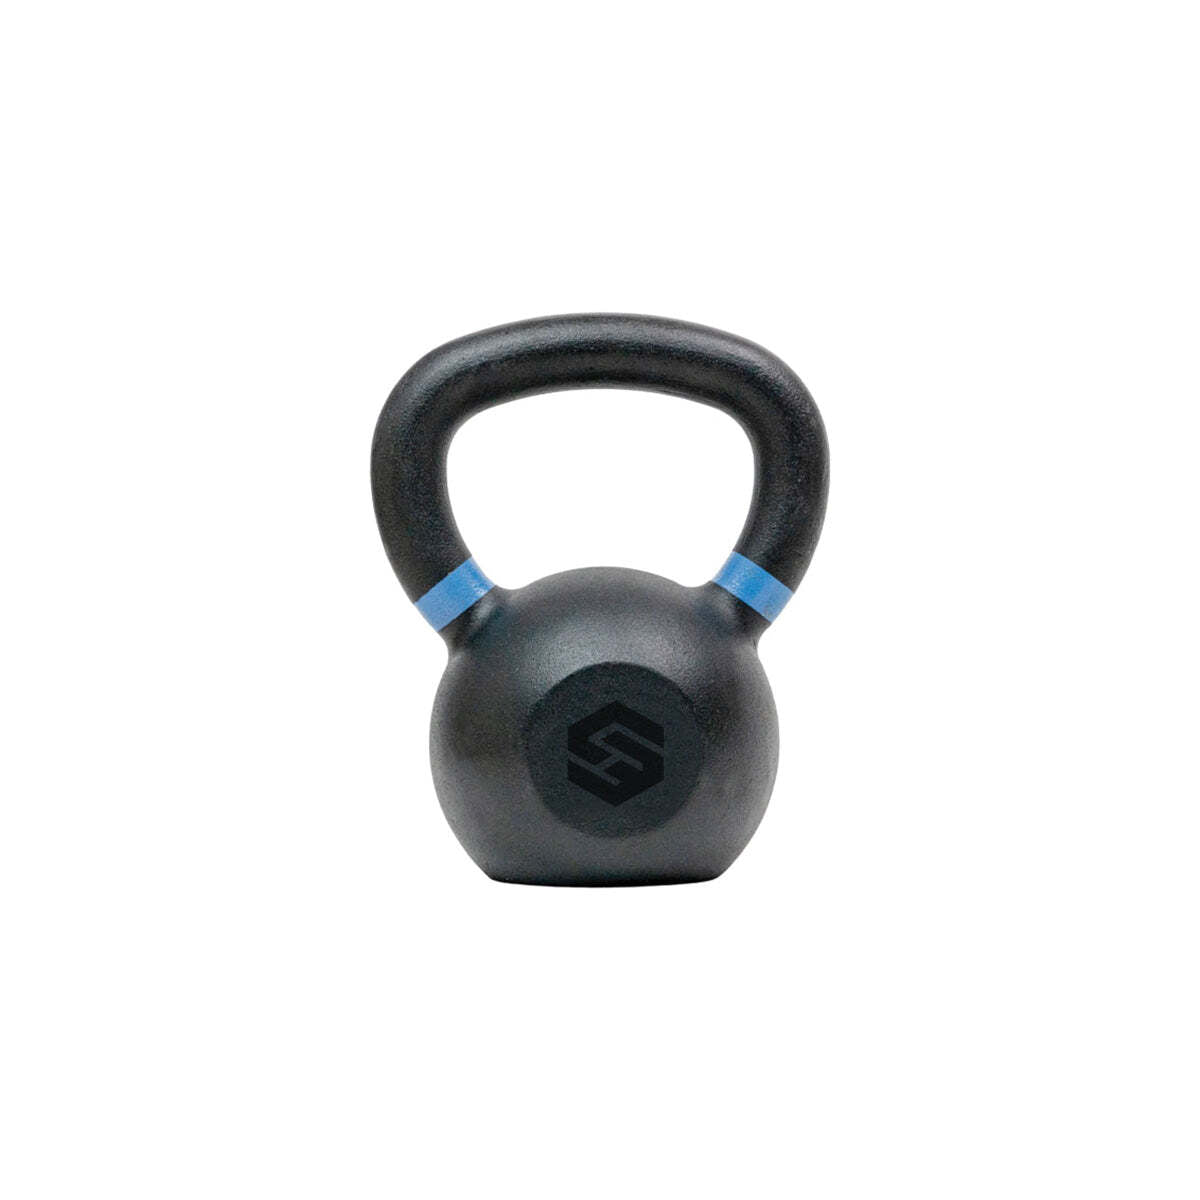 Skelcore Painted Kettlebell - 9LB to 53LB